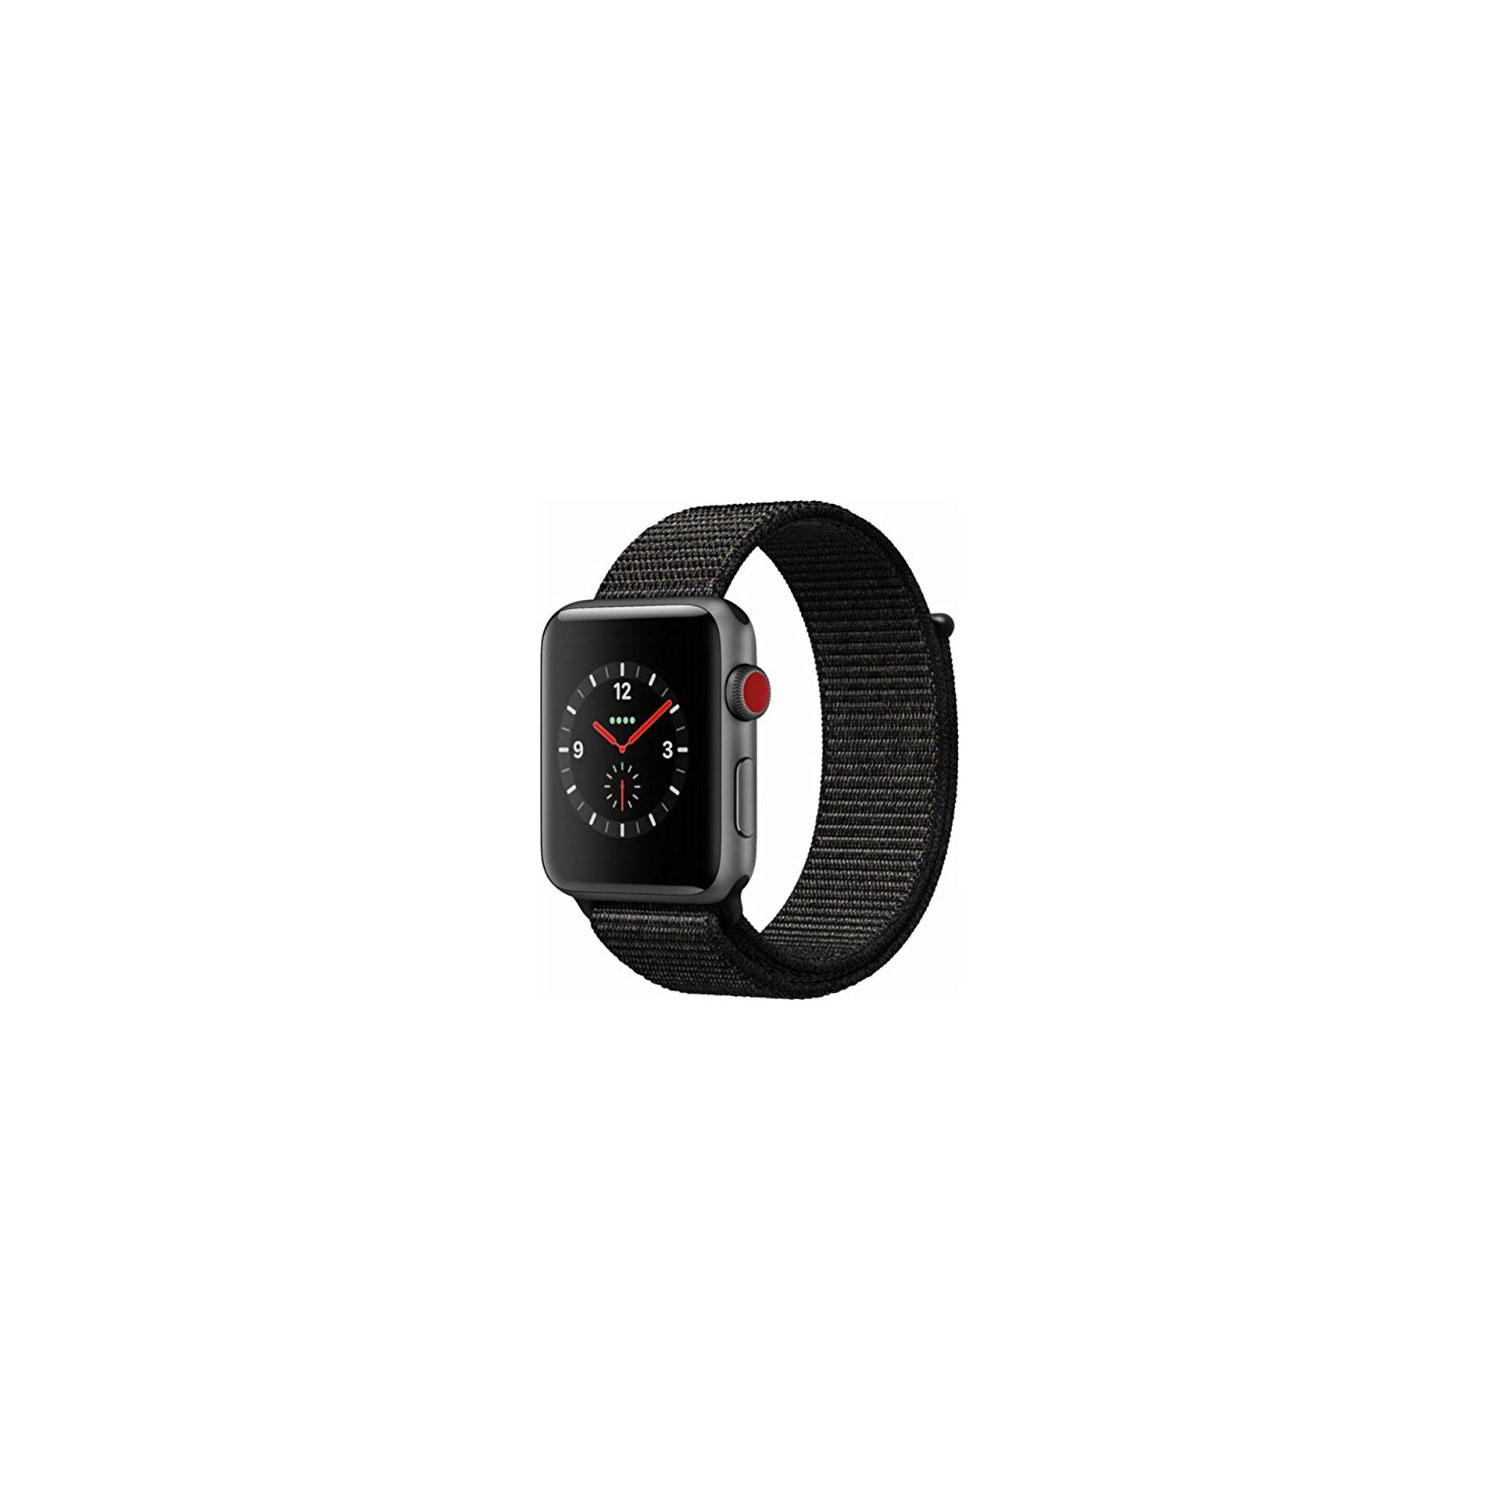 Apple Watch Series 3 38mm Smartwatch (GPS + Cellular, Space Gray Aluminum Case, Black Sport Loop Band) MRQE2LL/A